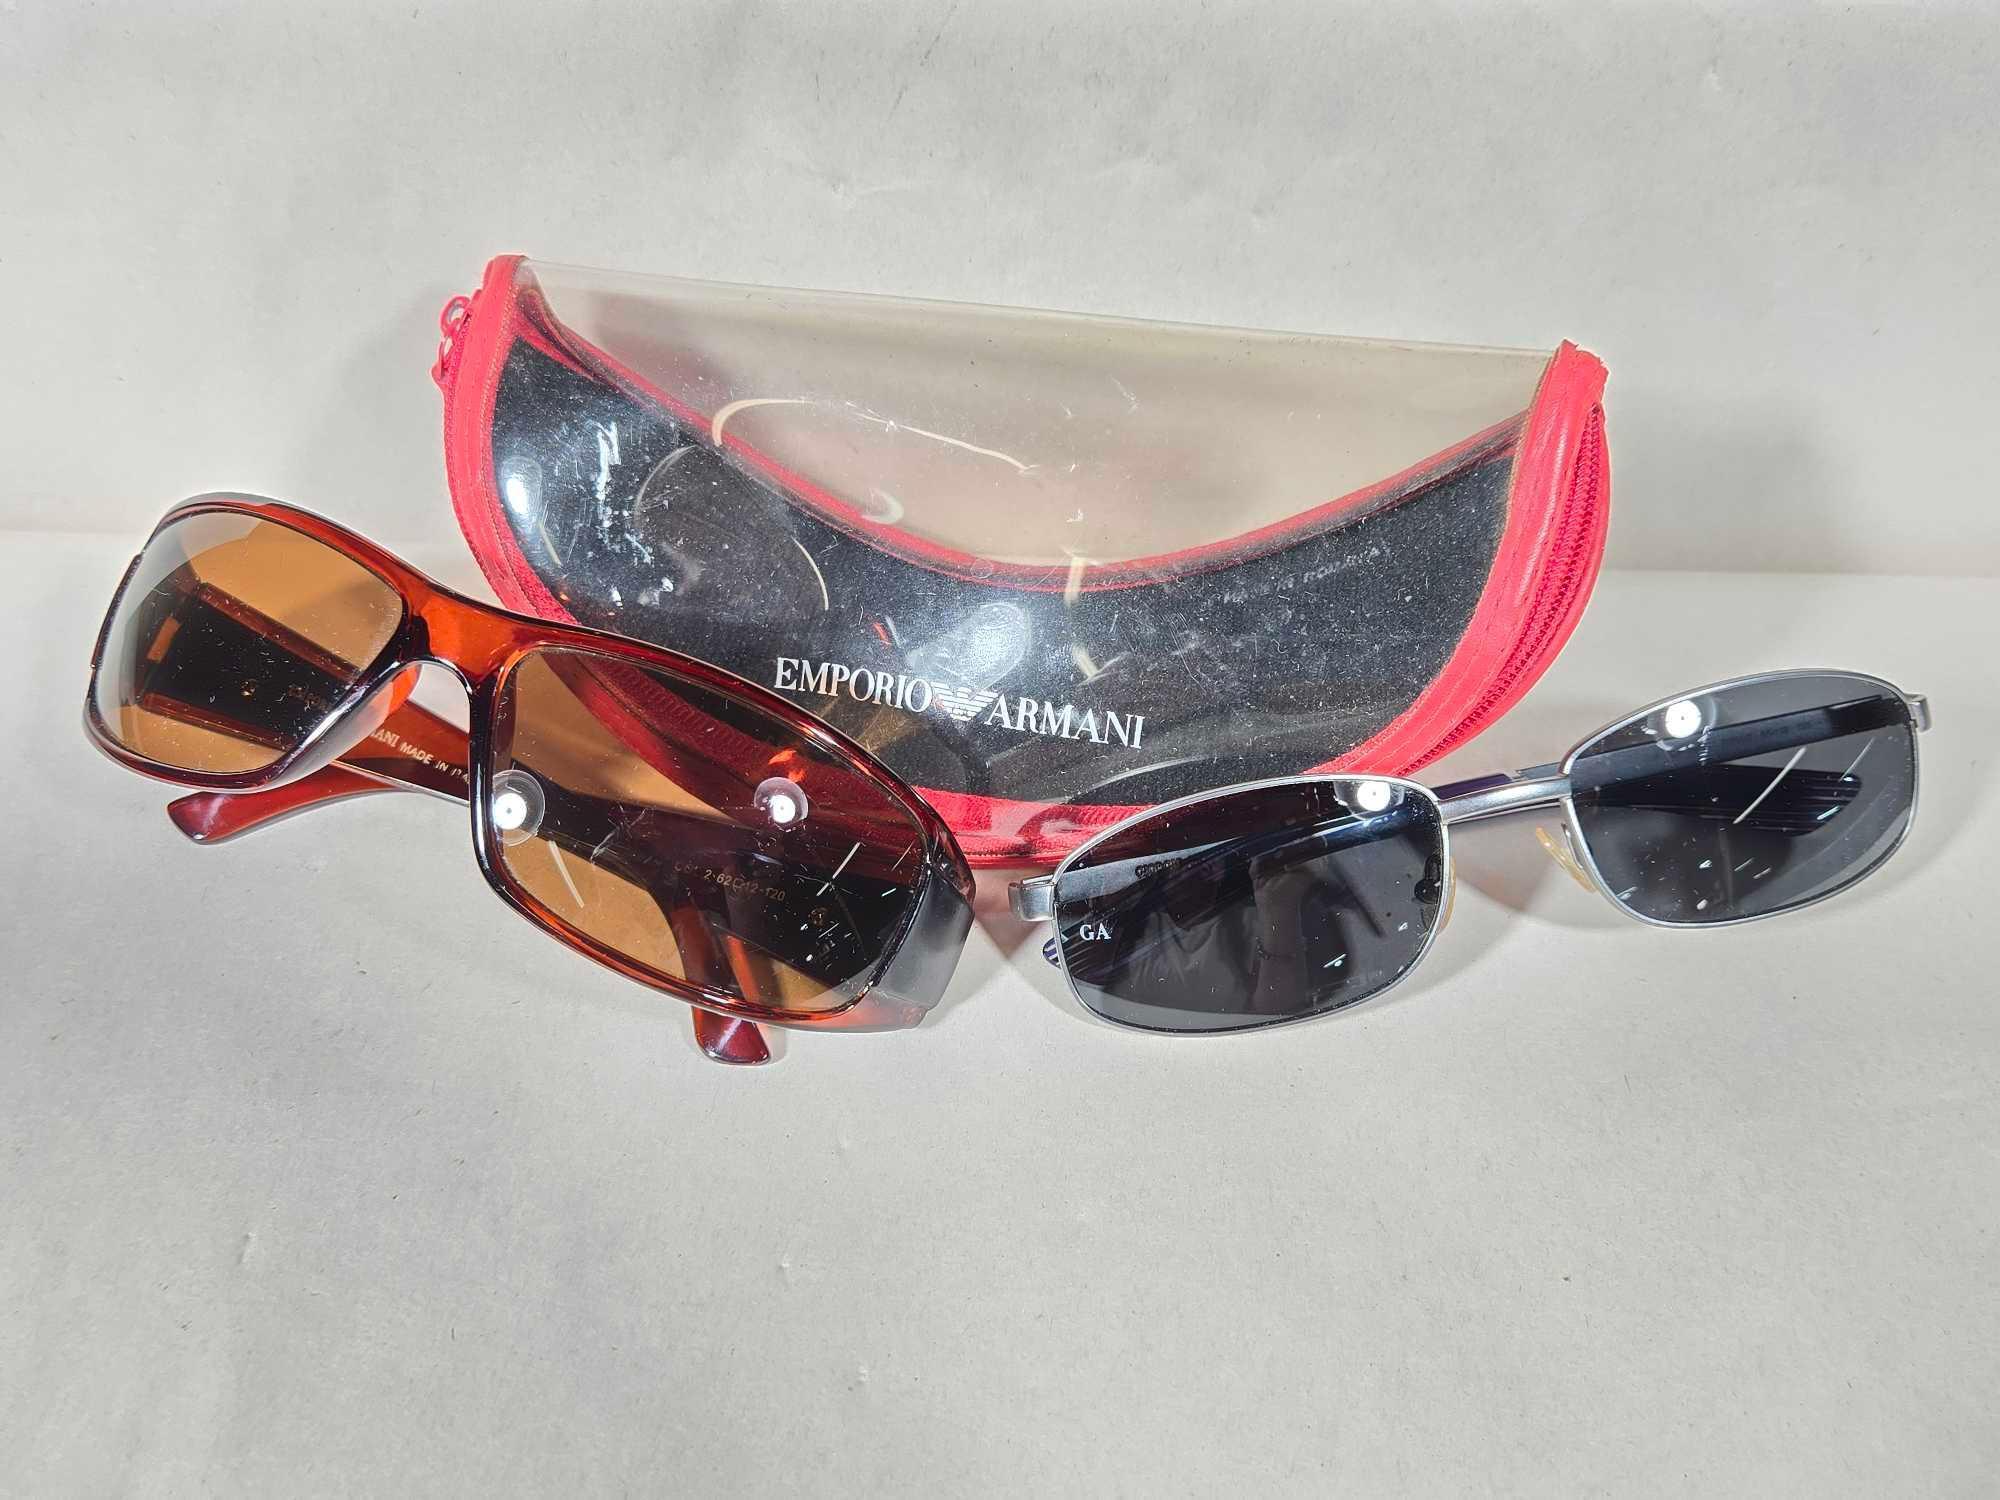 4 Pair of Pre-Owned Men's Sunglasses Incl. Oakley, Armani, & Timberland